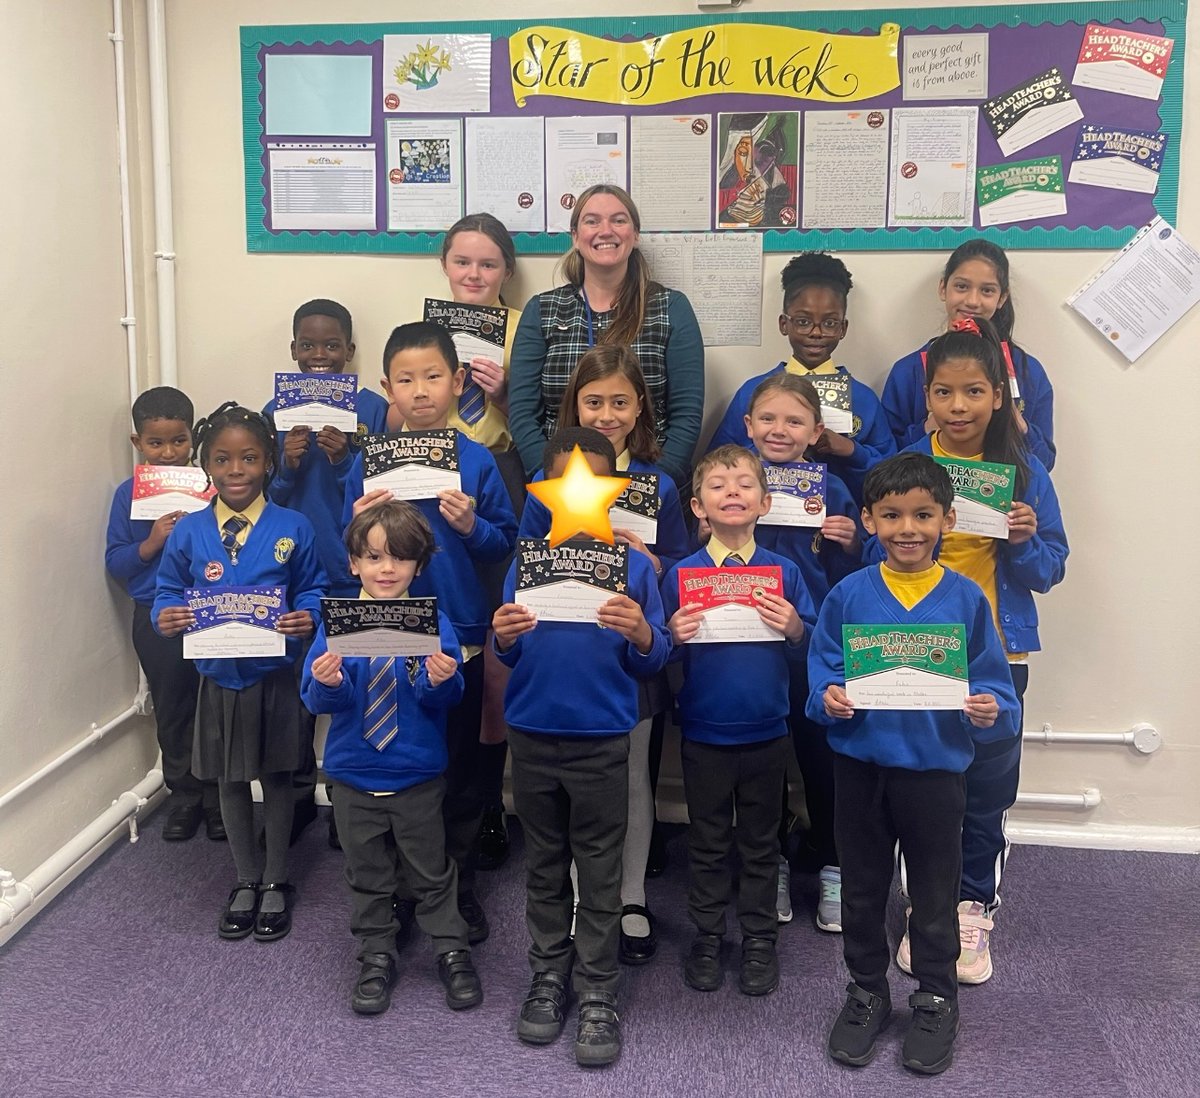 Well done to our wonderful stars for receiving the #HTAward. Keep up all the hard work 🌟⭐️💫🌟⭐️
#StarOfTheWeek